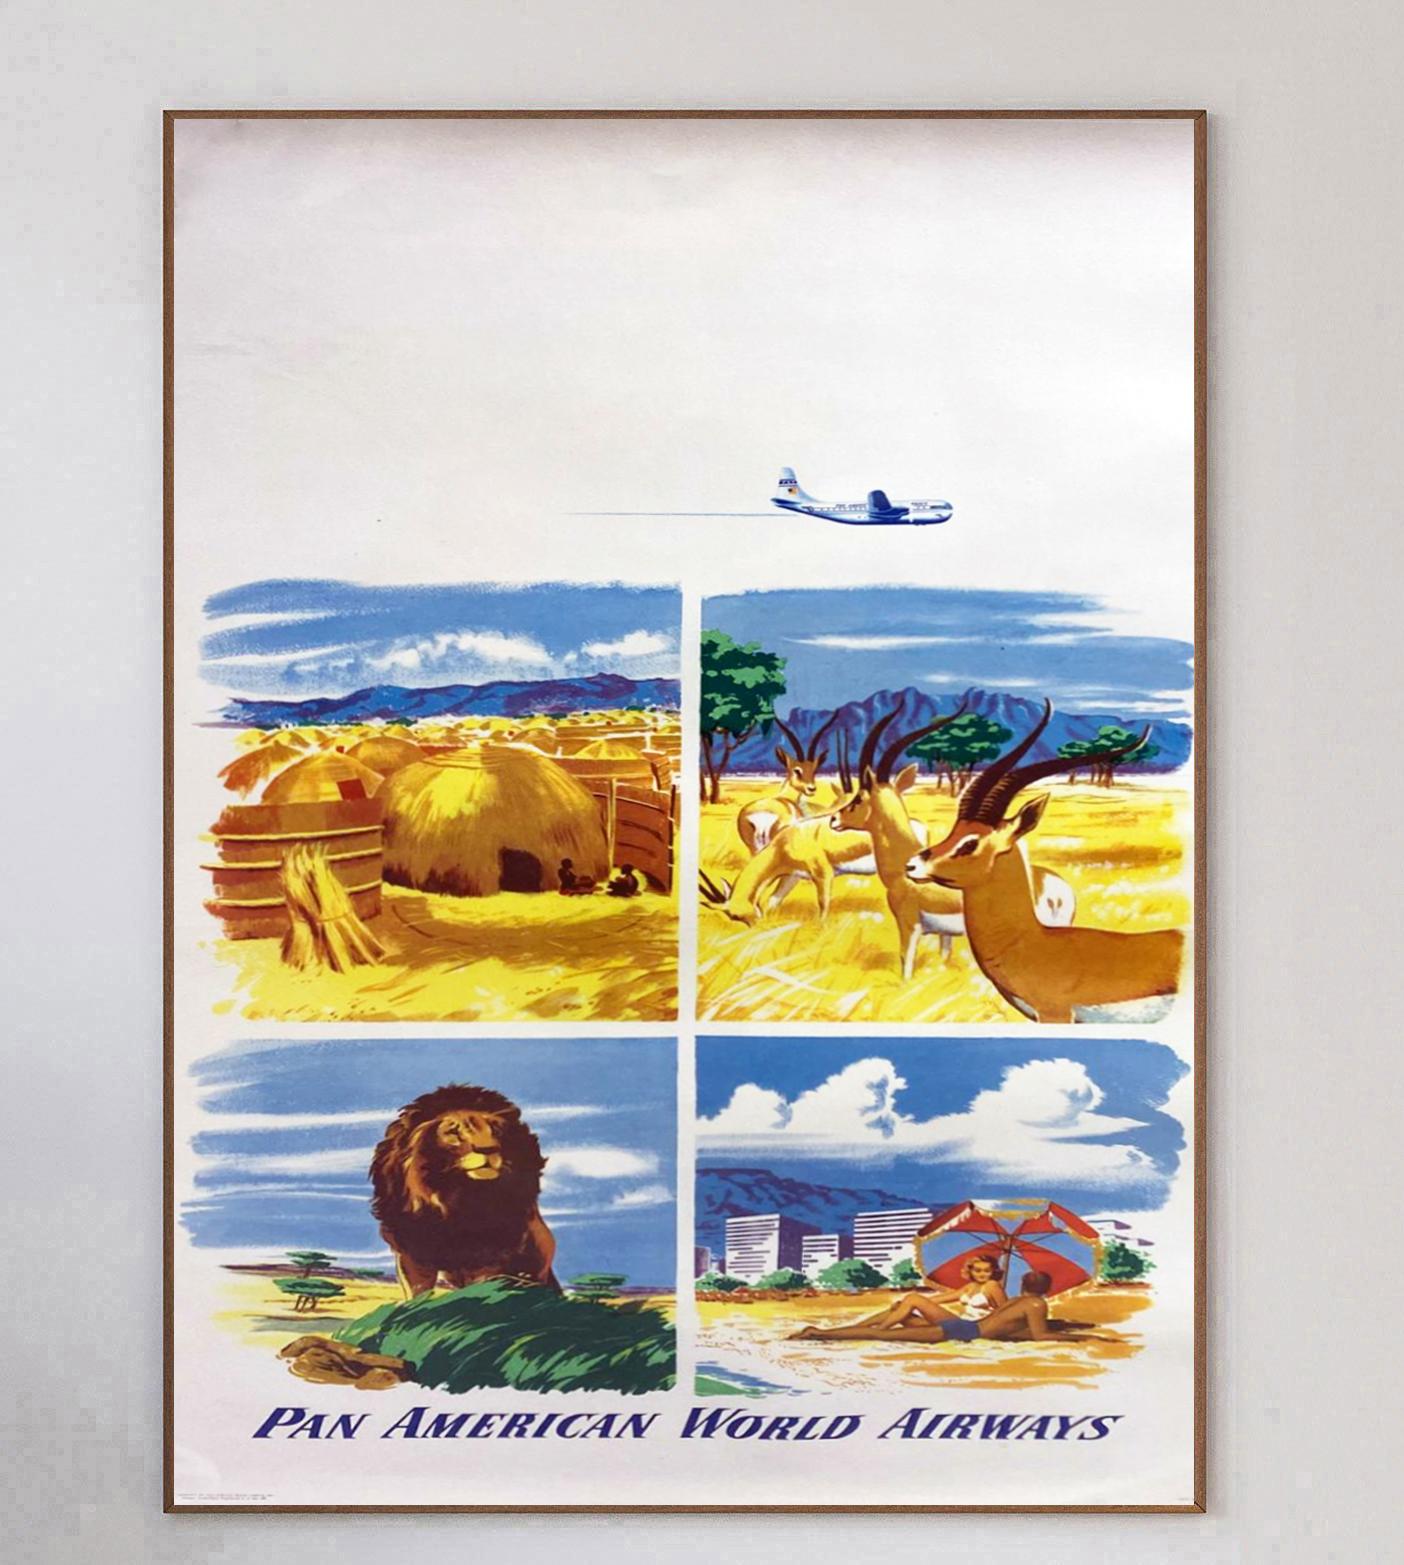 Wonderful & rare poster created in 1951 for Pan American World Airways, widely known as Pan Am. Depicting four gorgeous scenes featuring wildlife on a nature reserve, a local village and a beach resort, this poster showcases the best you can get